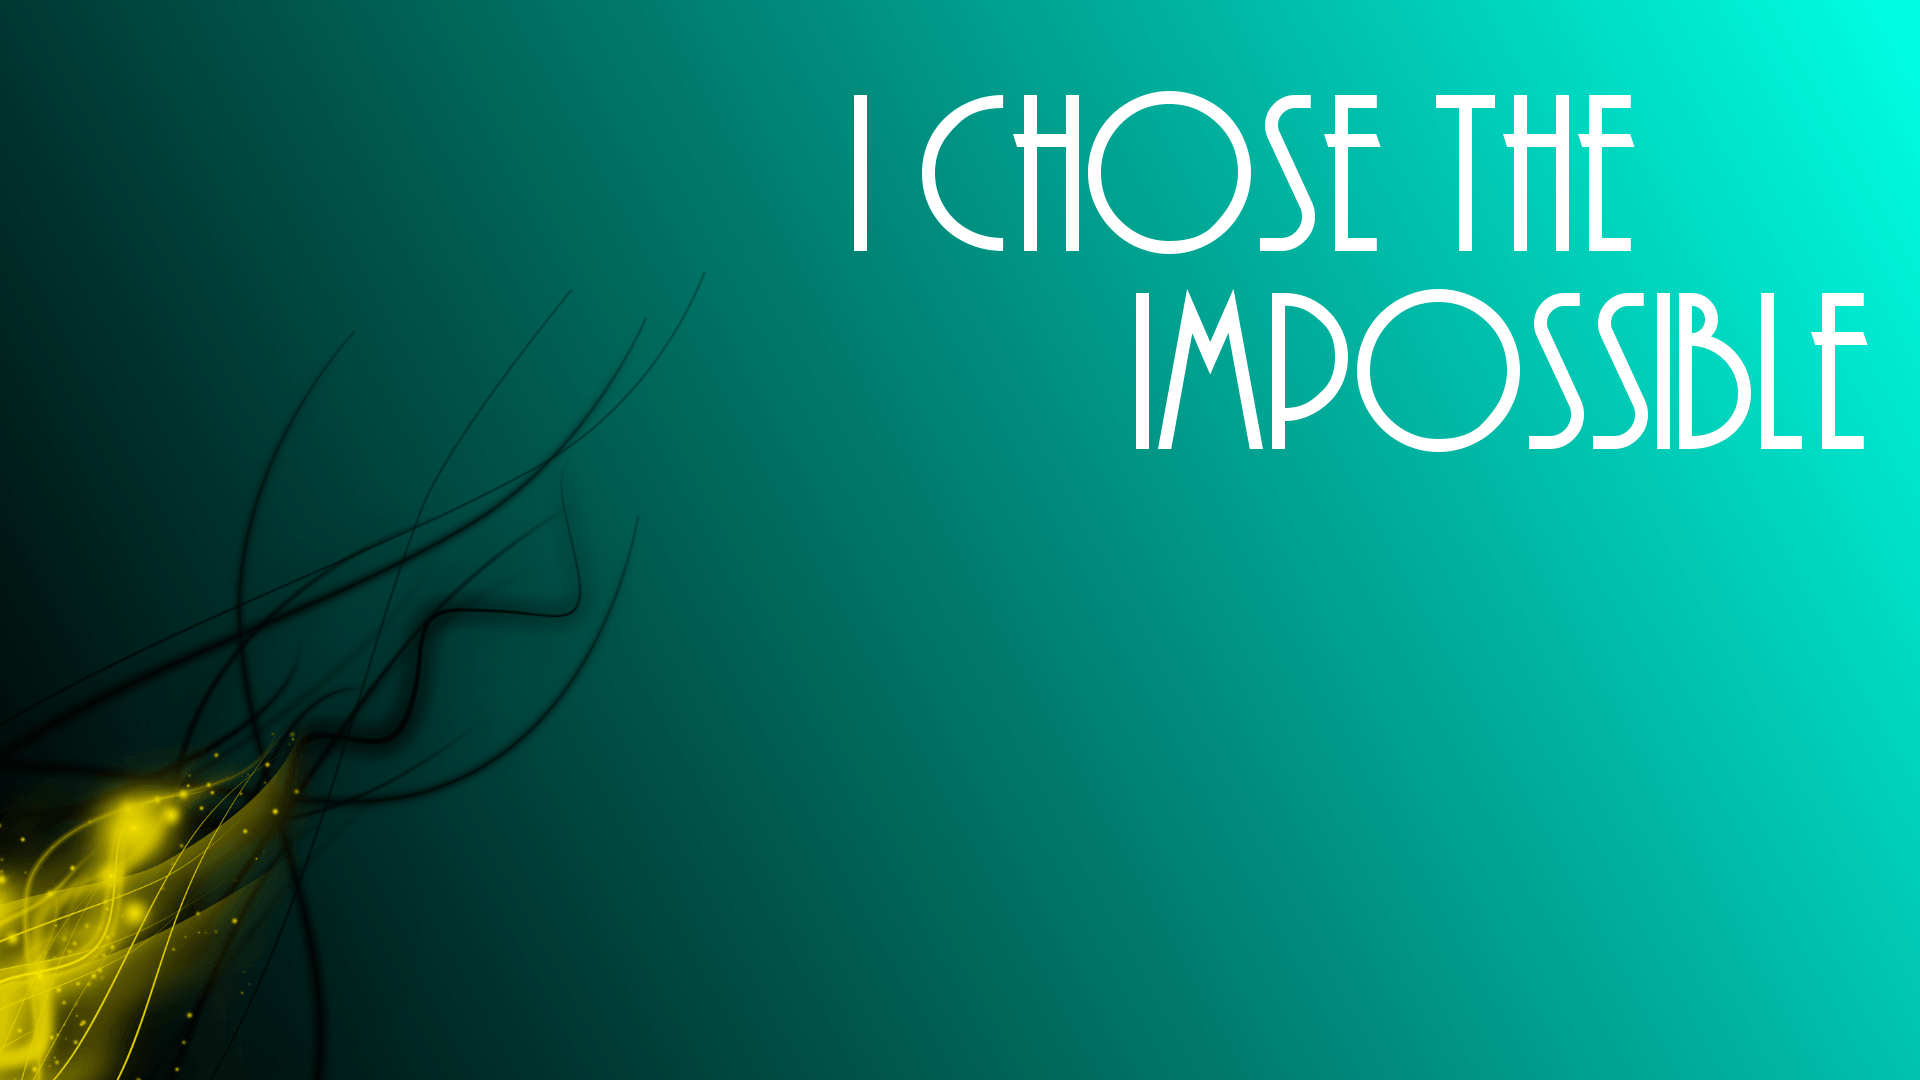 I chose the impossible. Another wallpaper I did inspired